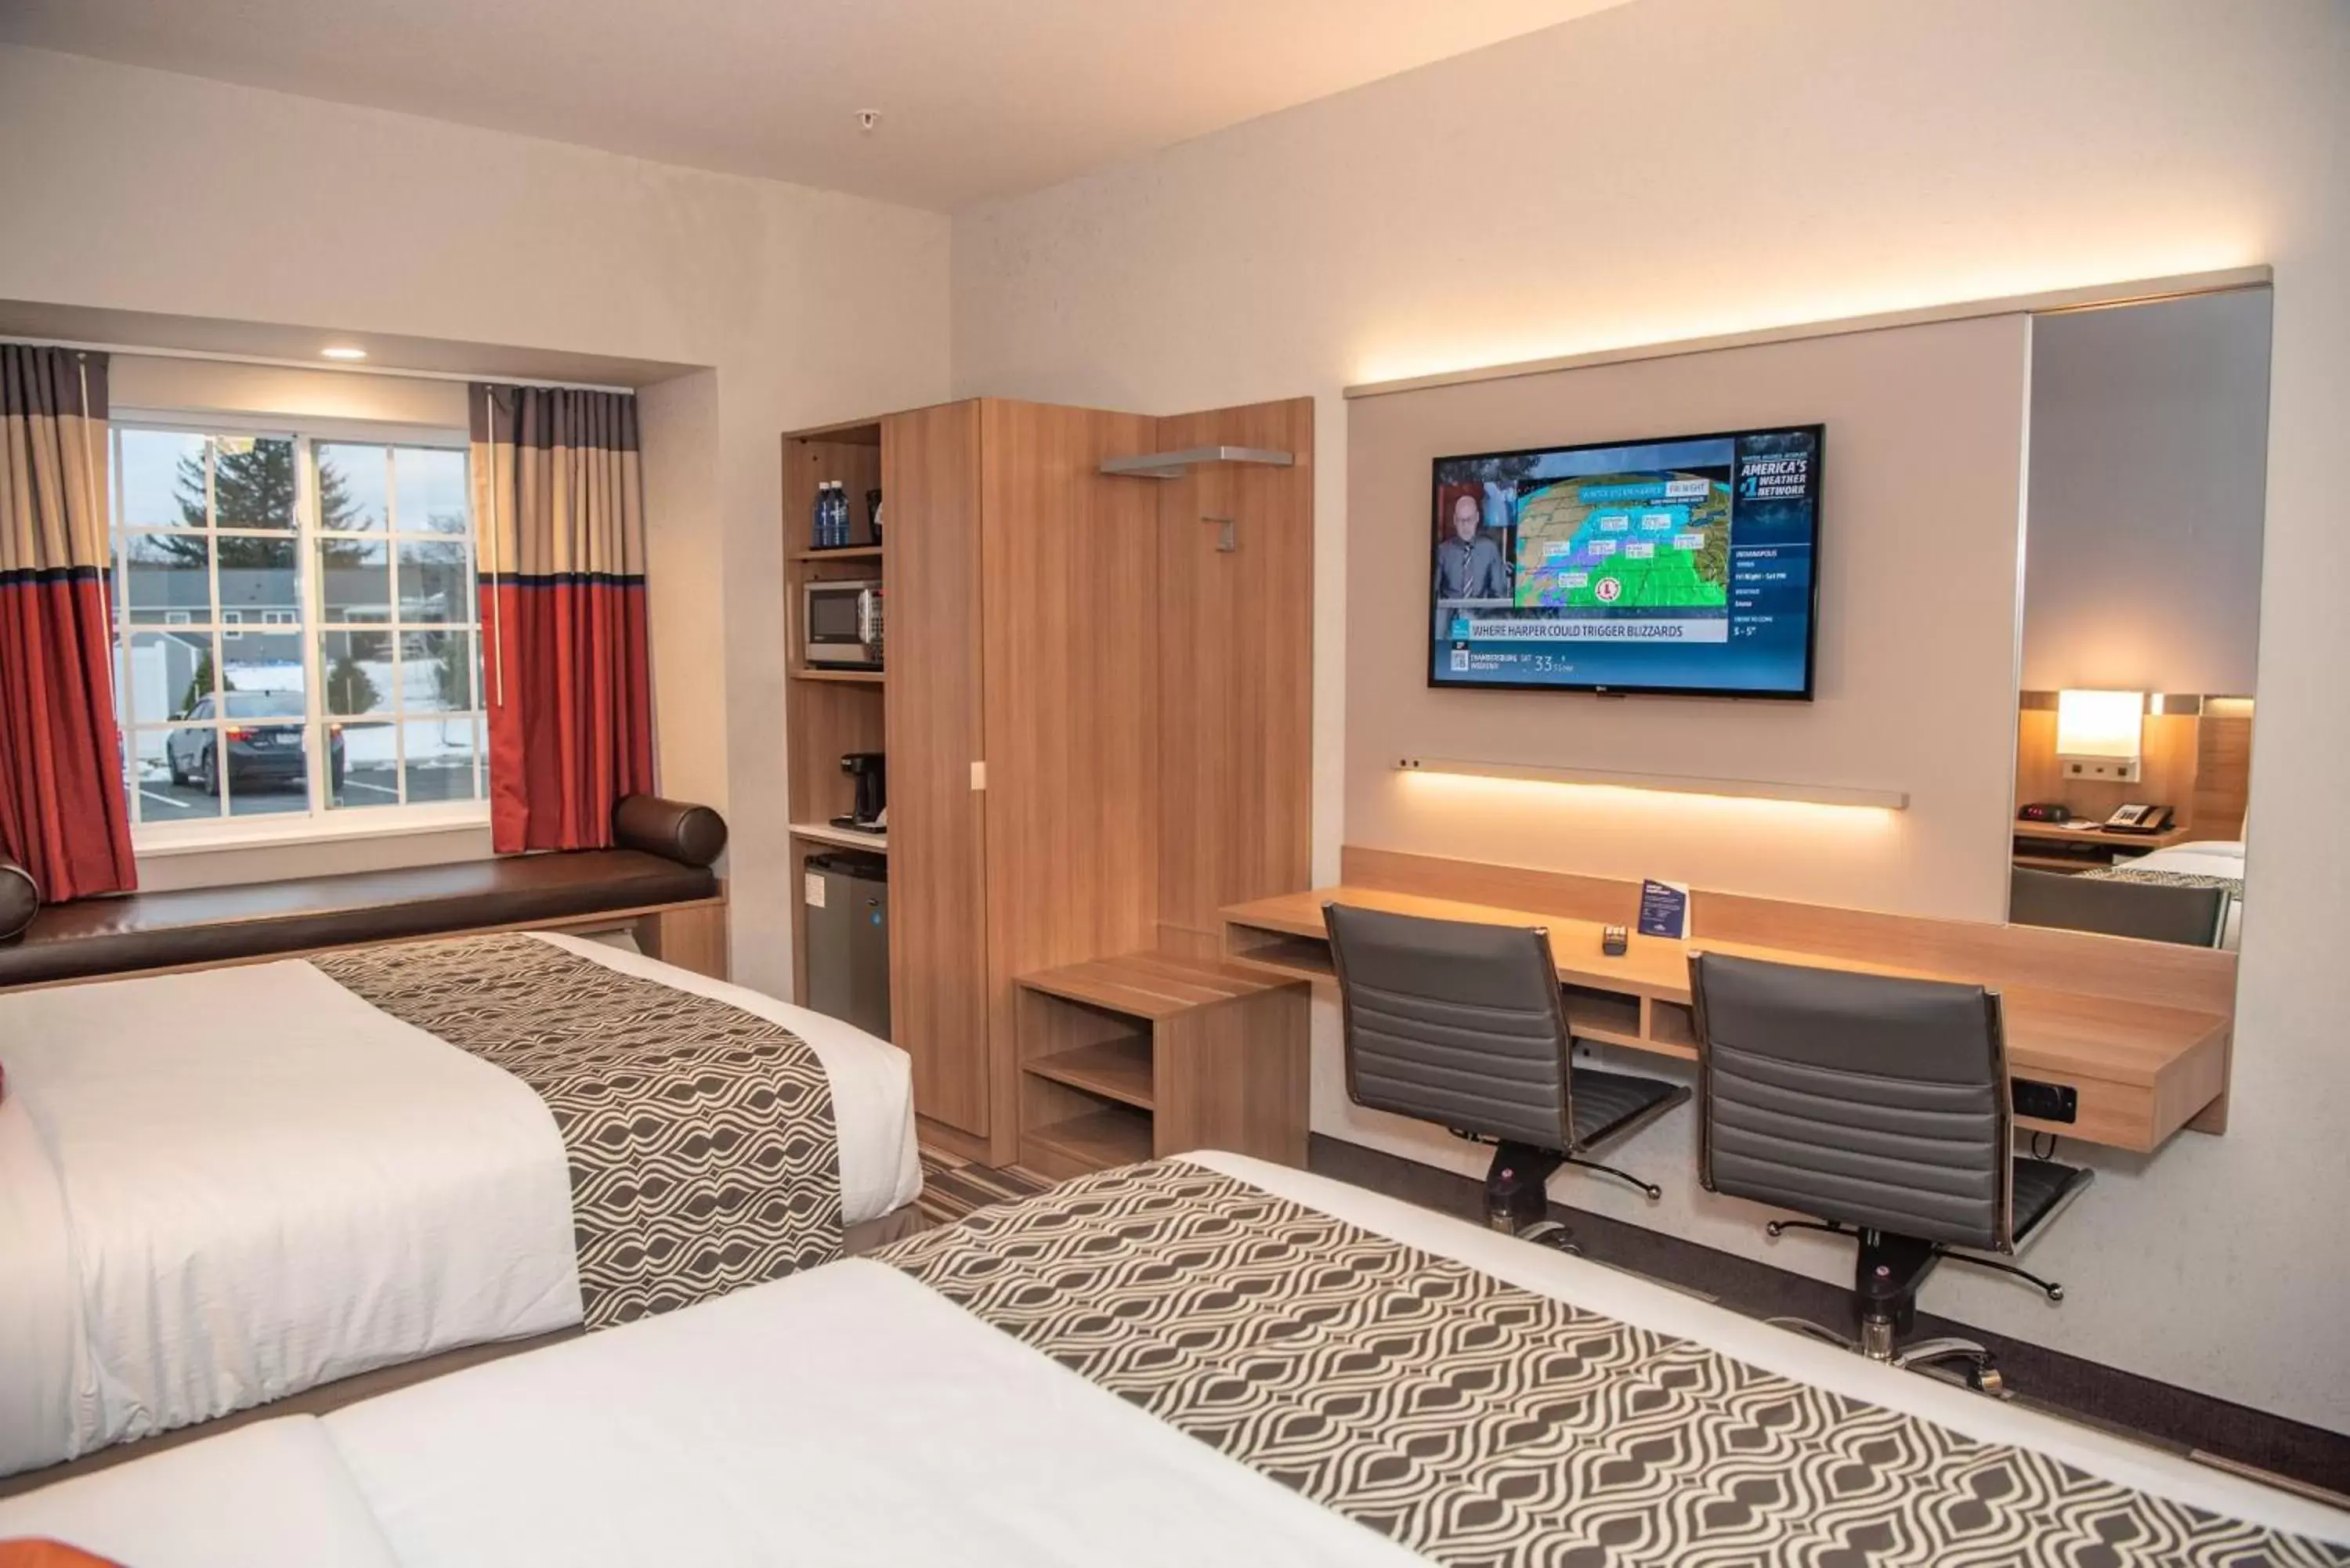 TV and multimedia in Microtel Inn & Suites by Wyndham Carlisle